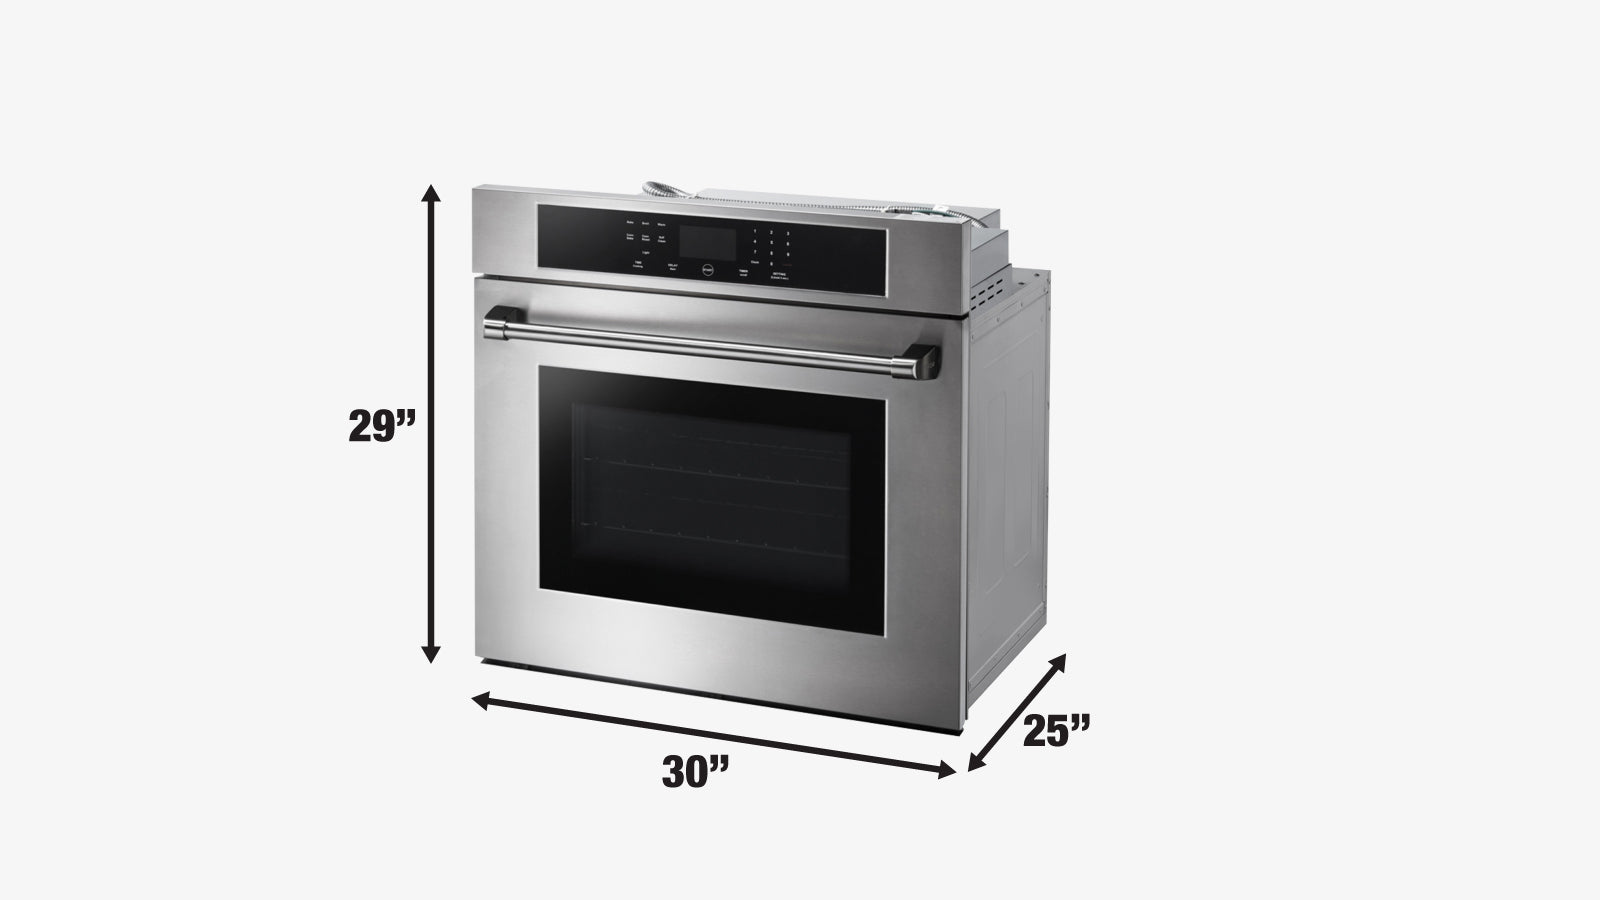 TMG Living Kitchen 30” Professional Electric Wall Oven, Self-Clean, Gray Porcelain w/White Dots, 3500W, TMG-HOW30-specifications-image